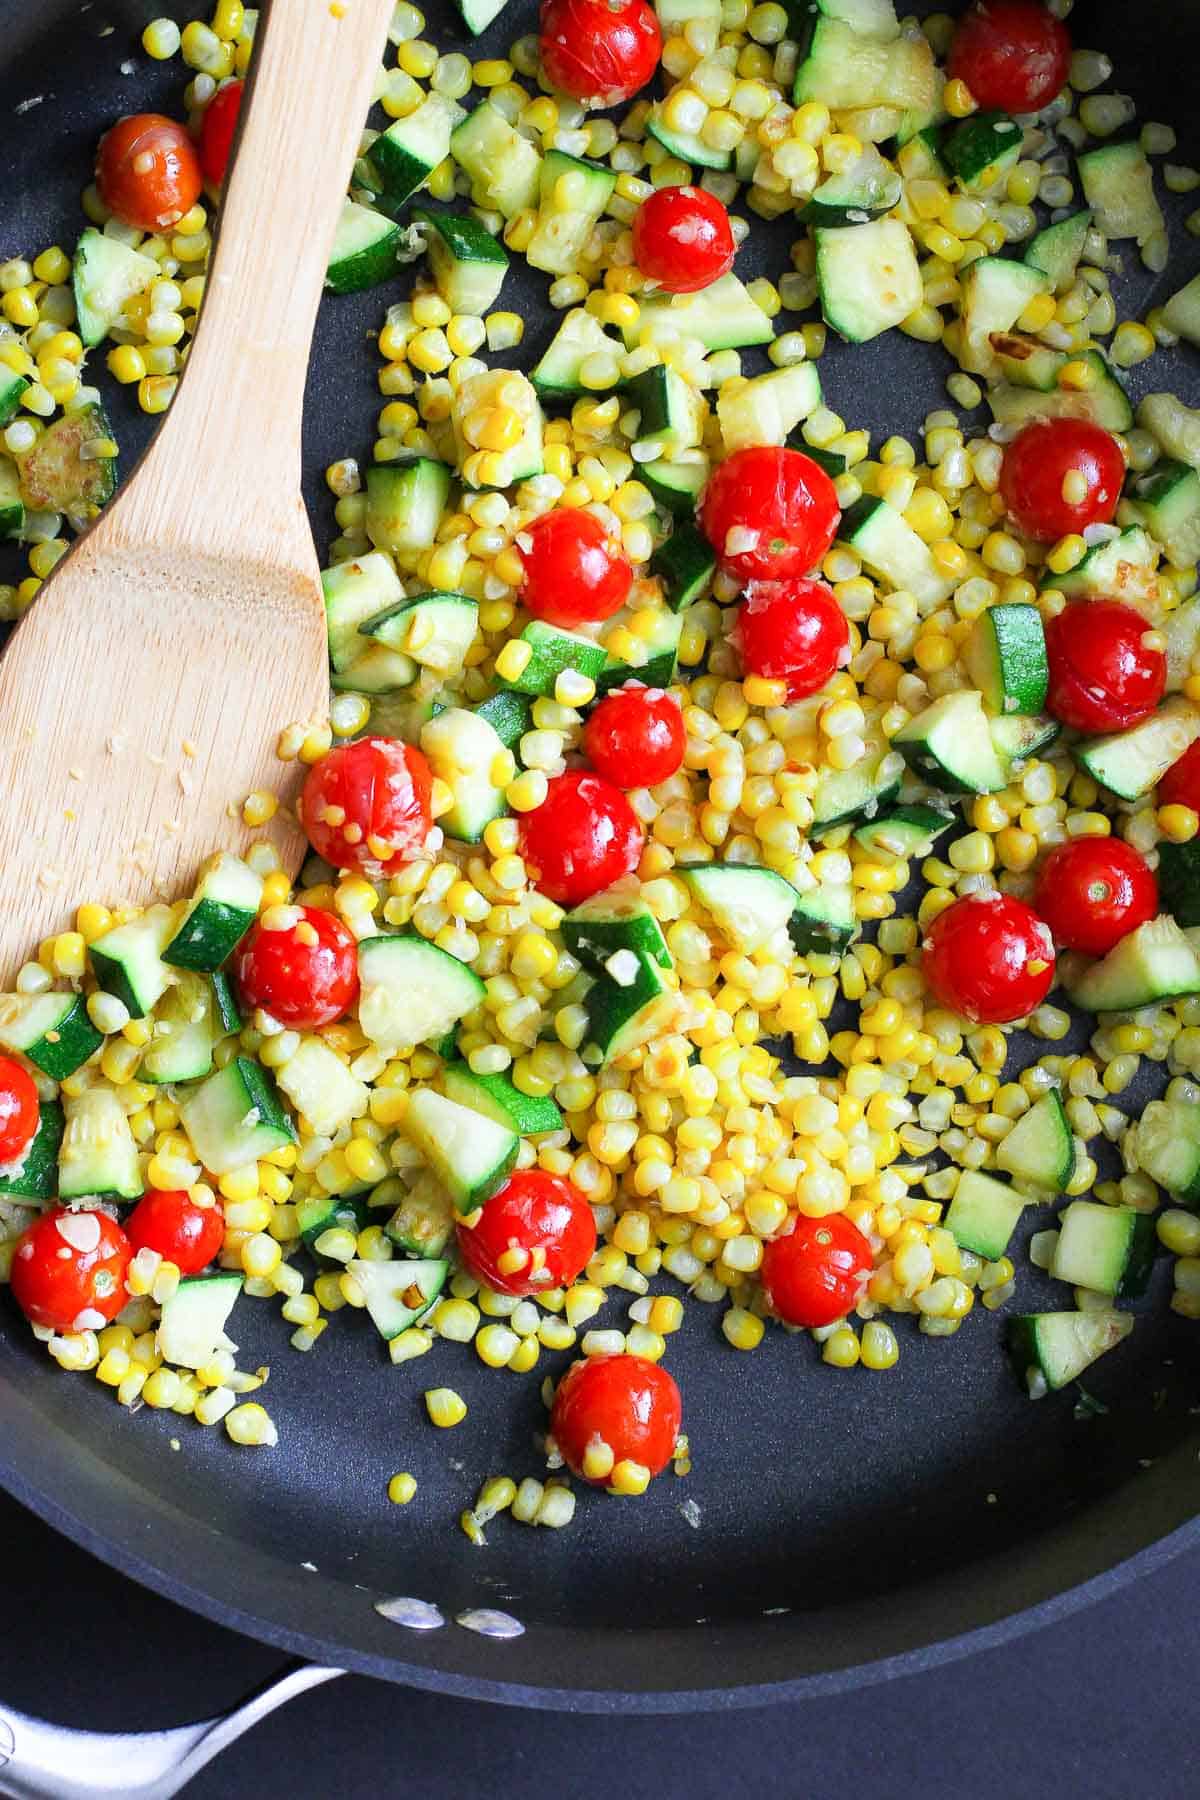 Zucchini, corn kernels and cherry tomatoes in a skillet.